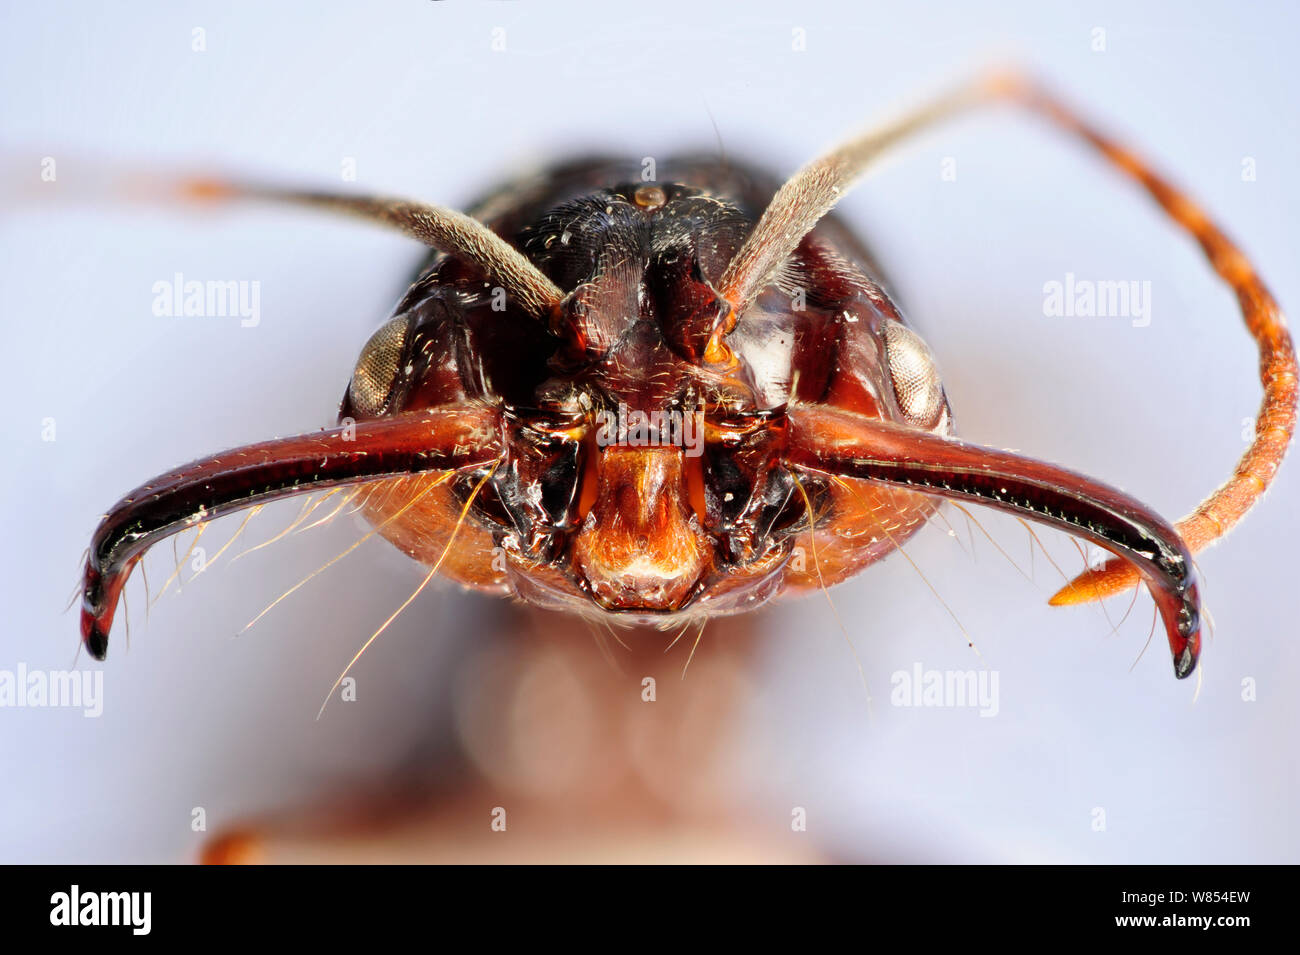 Trap jaw ant (Odontomachus sp.) close-up showing powerful mandibles with sensory hairs. Specimen photographed using digital focus stacking Stock Photo